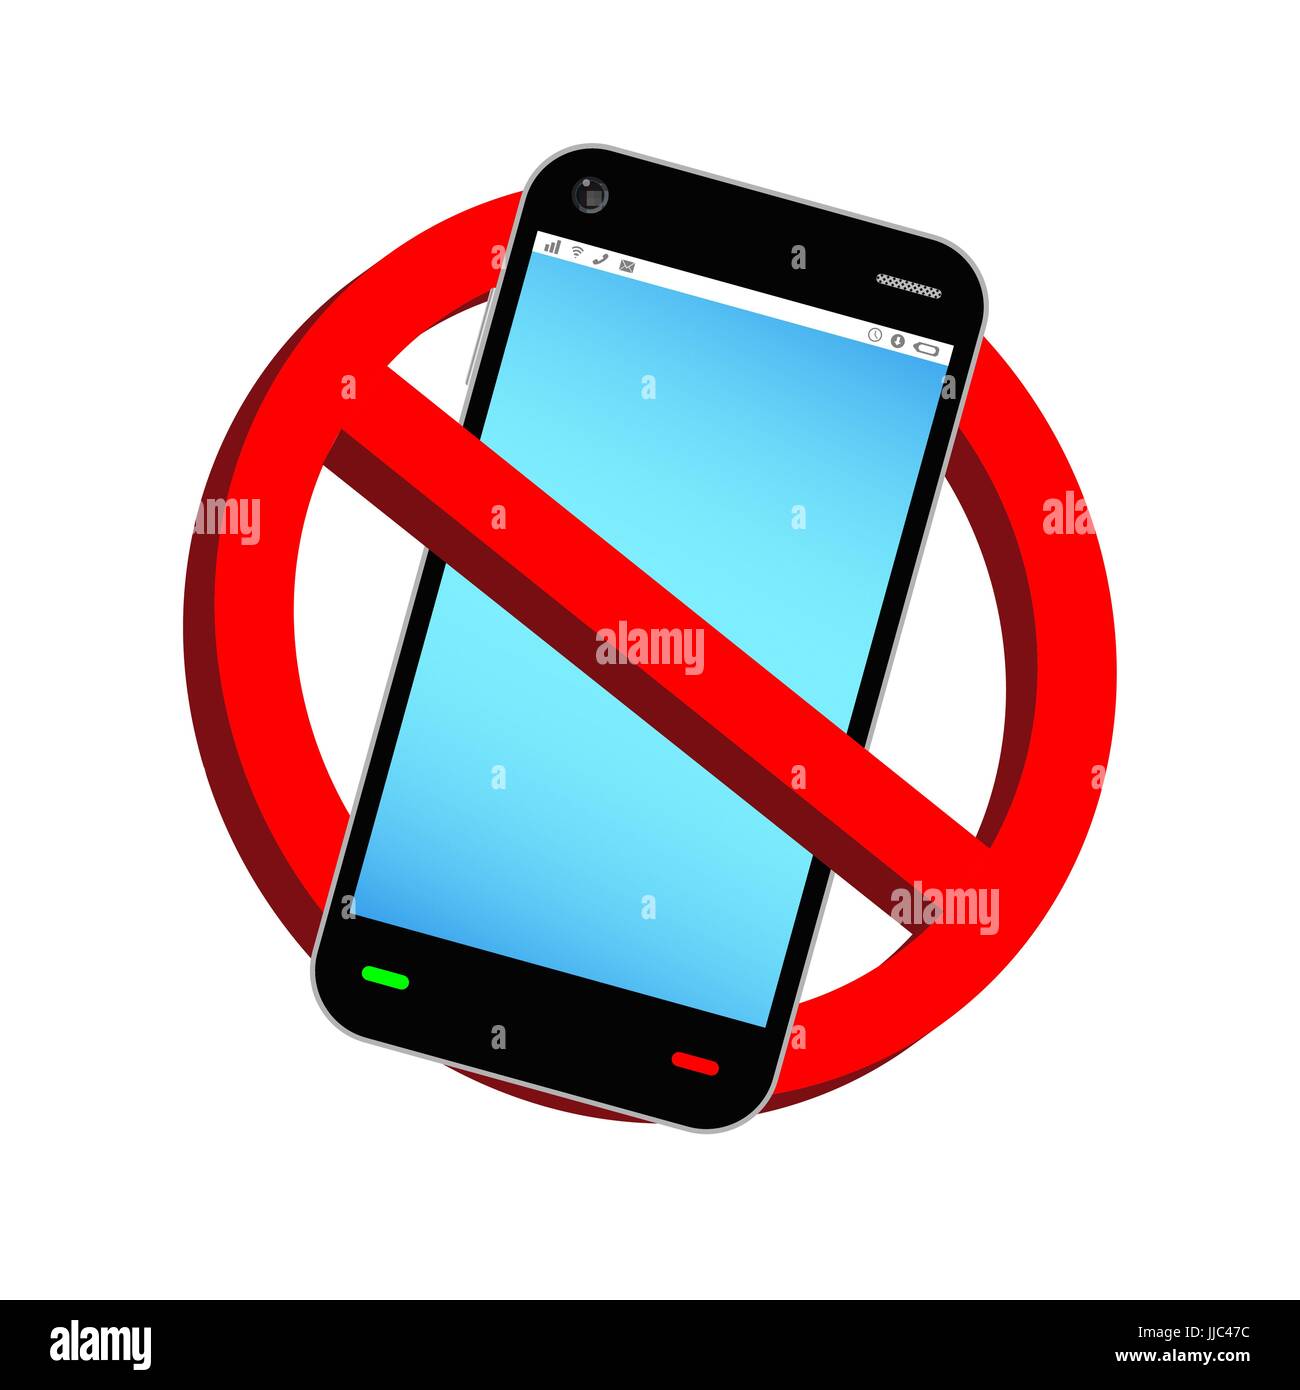 do not use phone prohibition sign vector Stock Vector